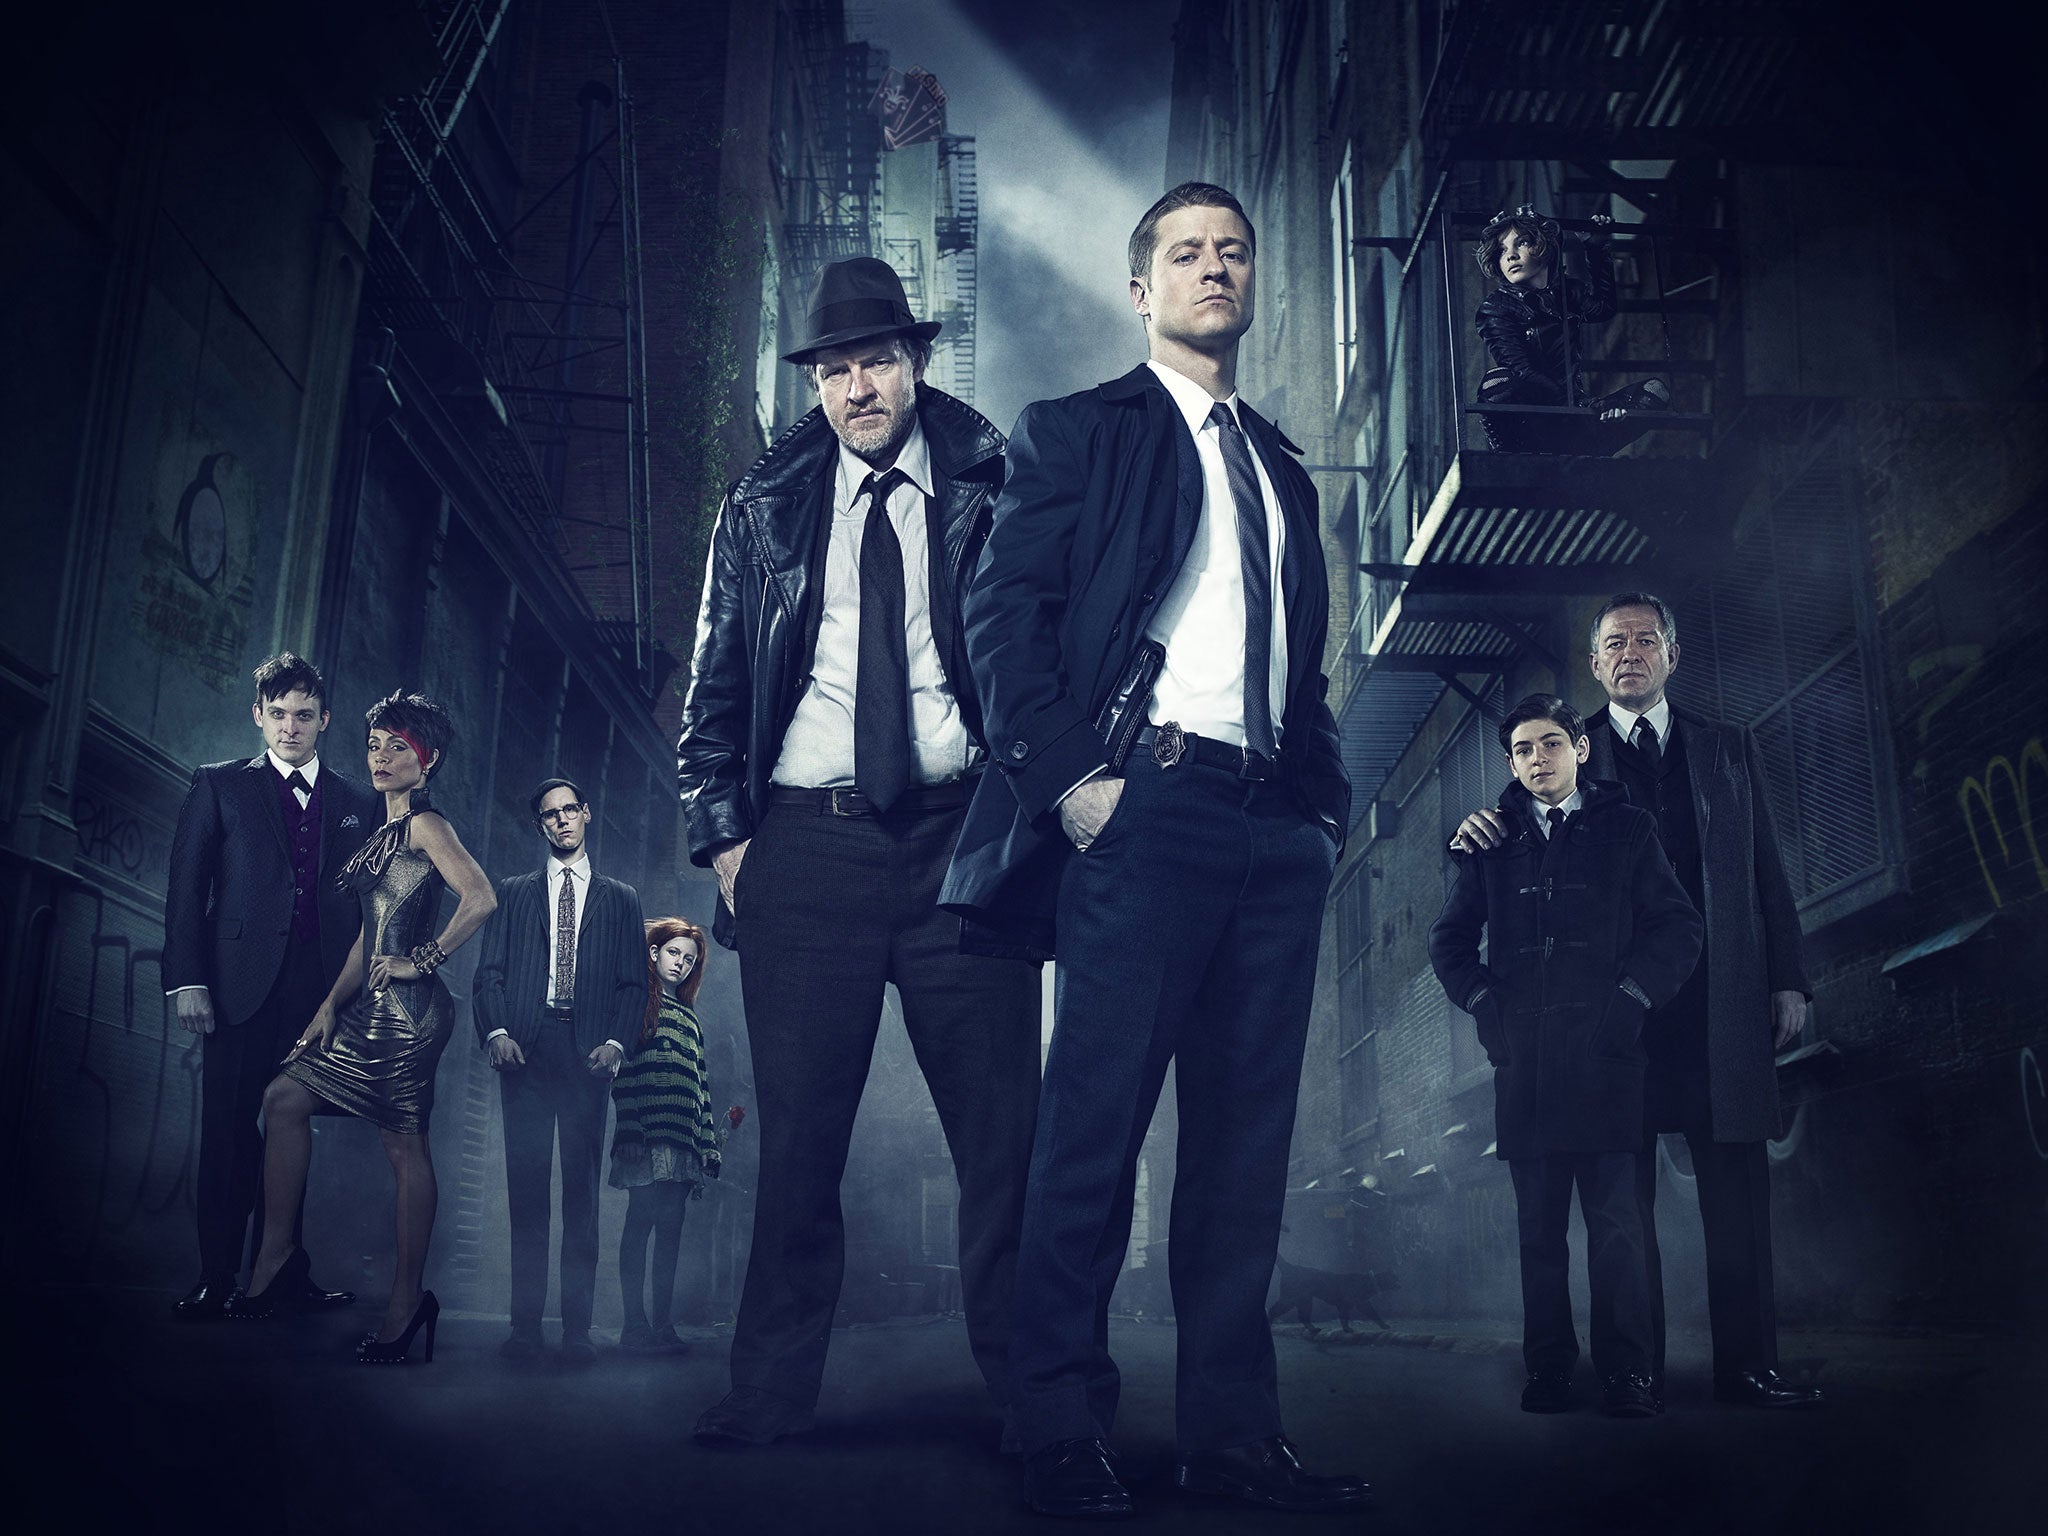 Gotham is coming to UK shores this autumn